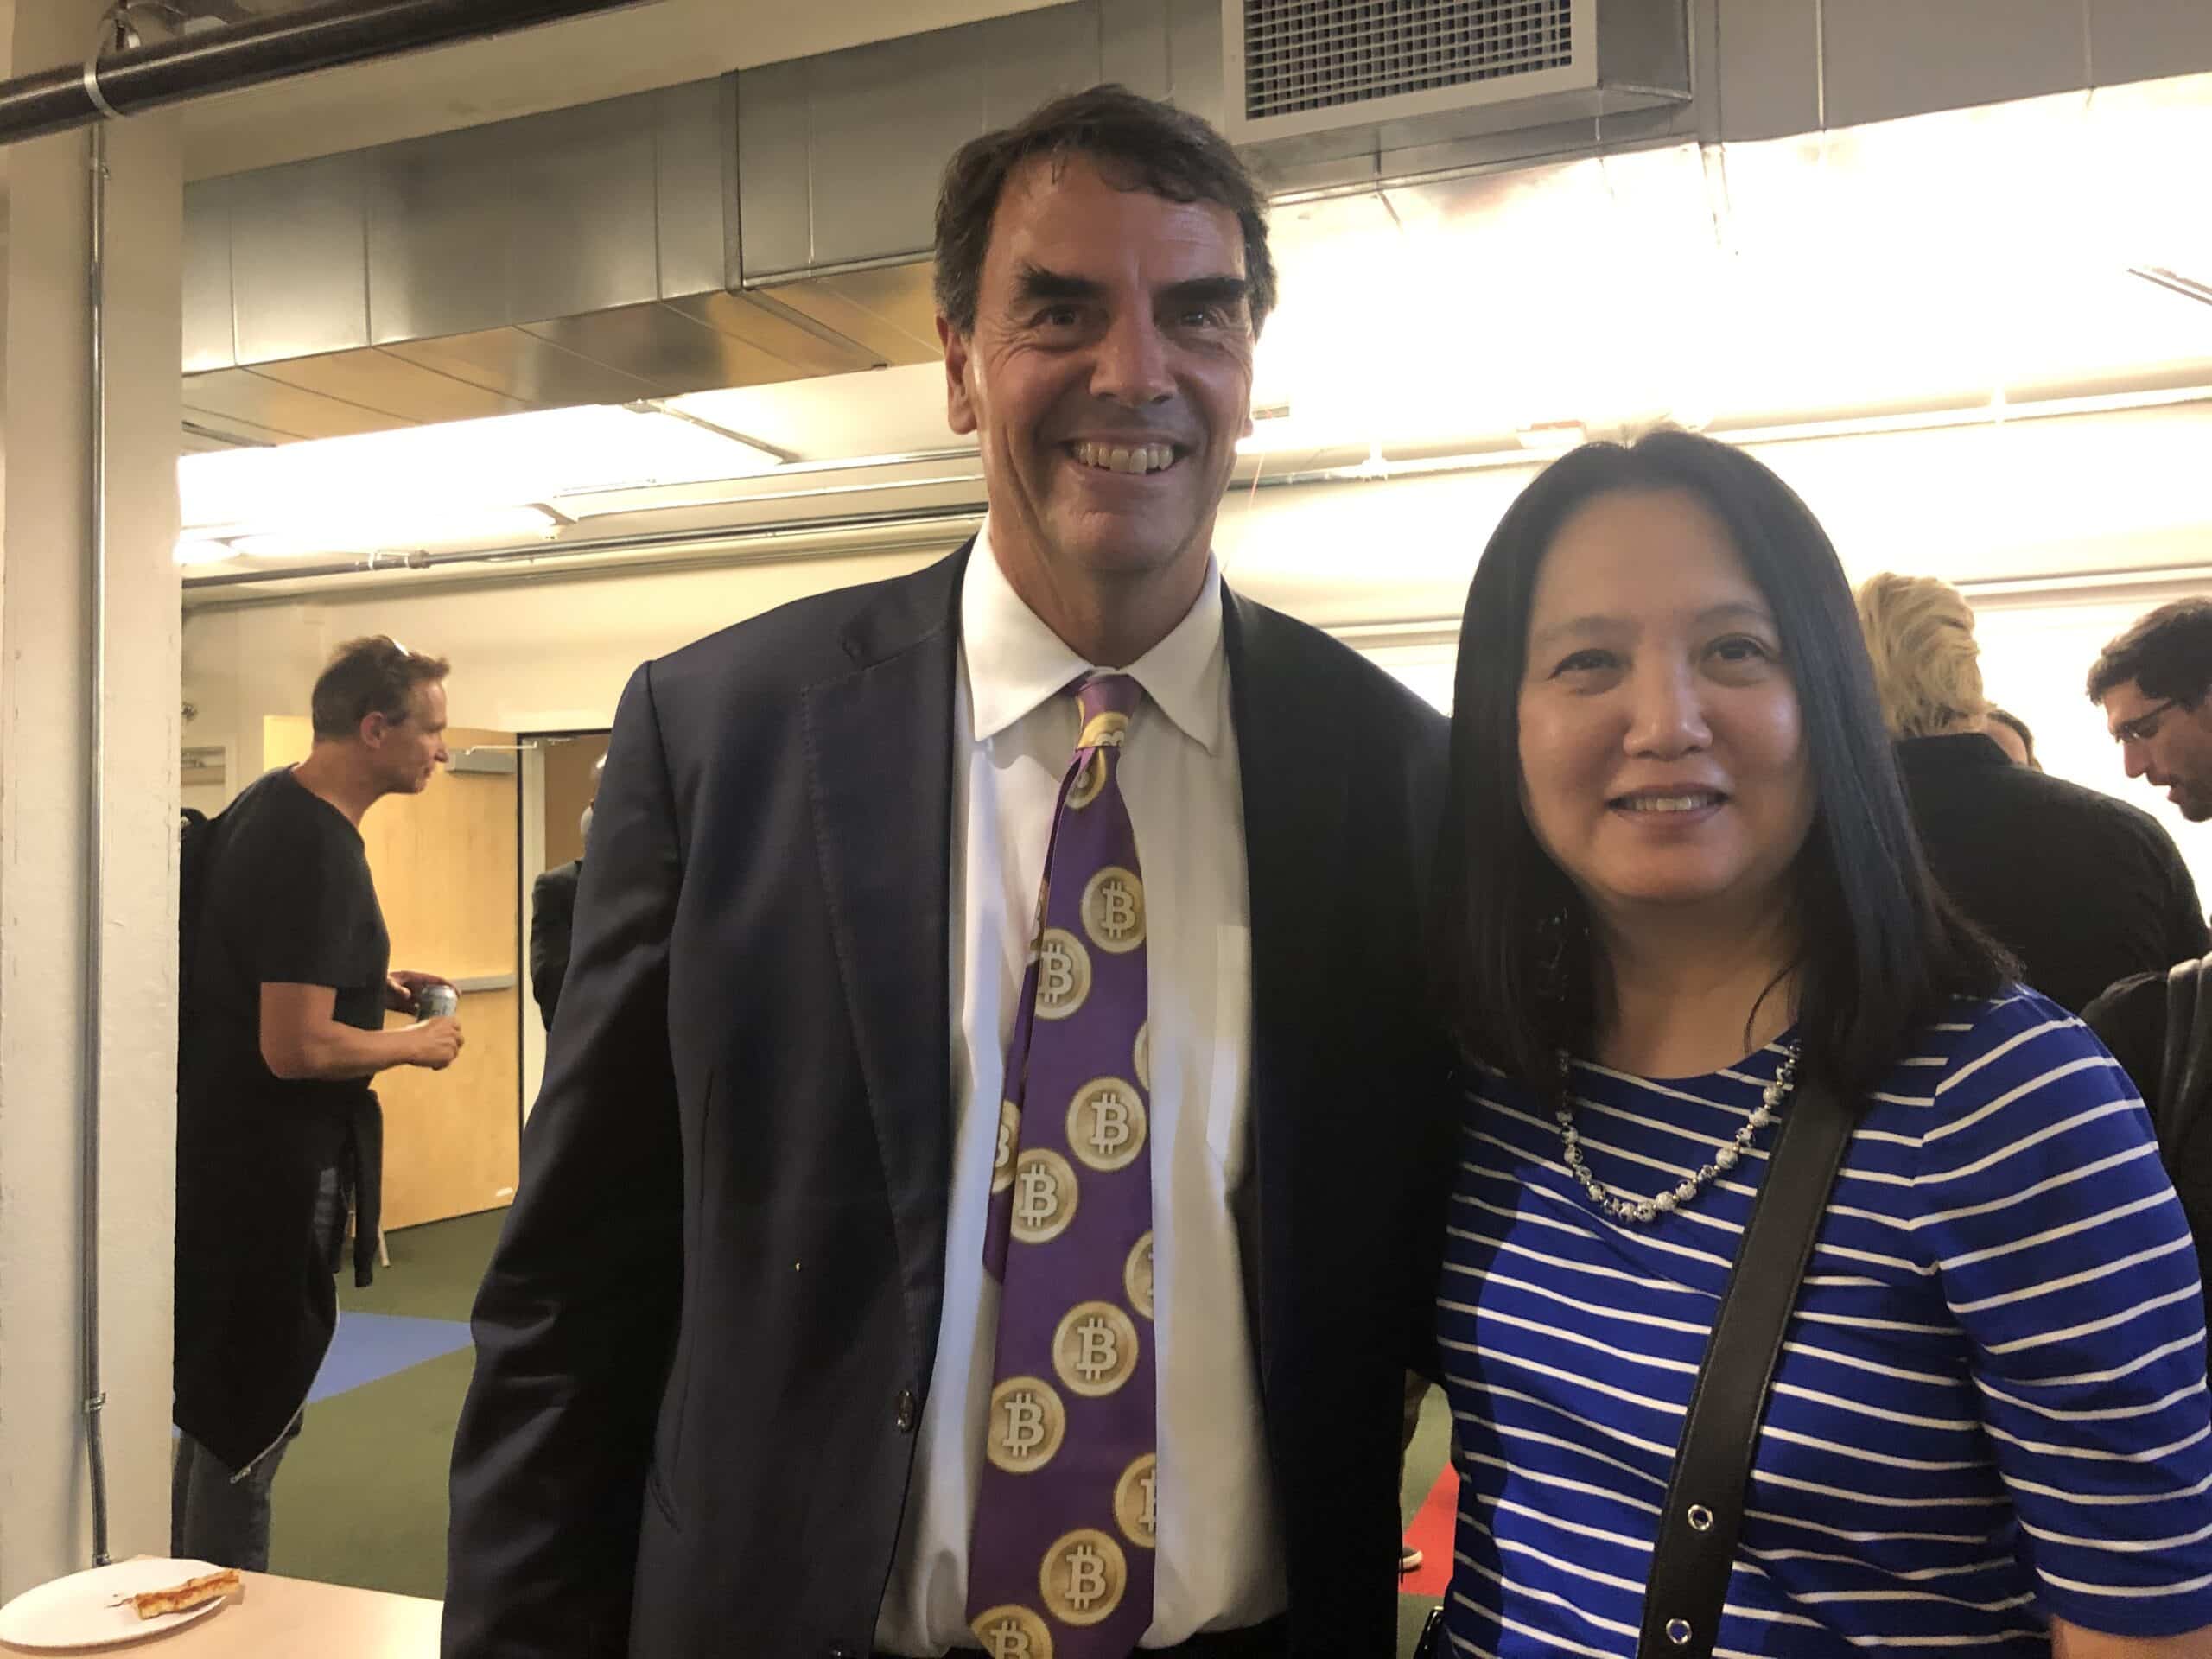 Tim Draper shared his vision about bitcoin and crypto at Draper University on Sept. 11, 2019. Inspiring. #Vision is the foundationan.